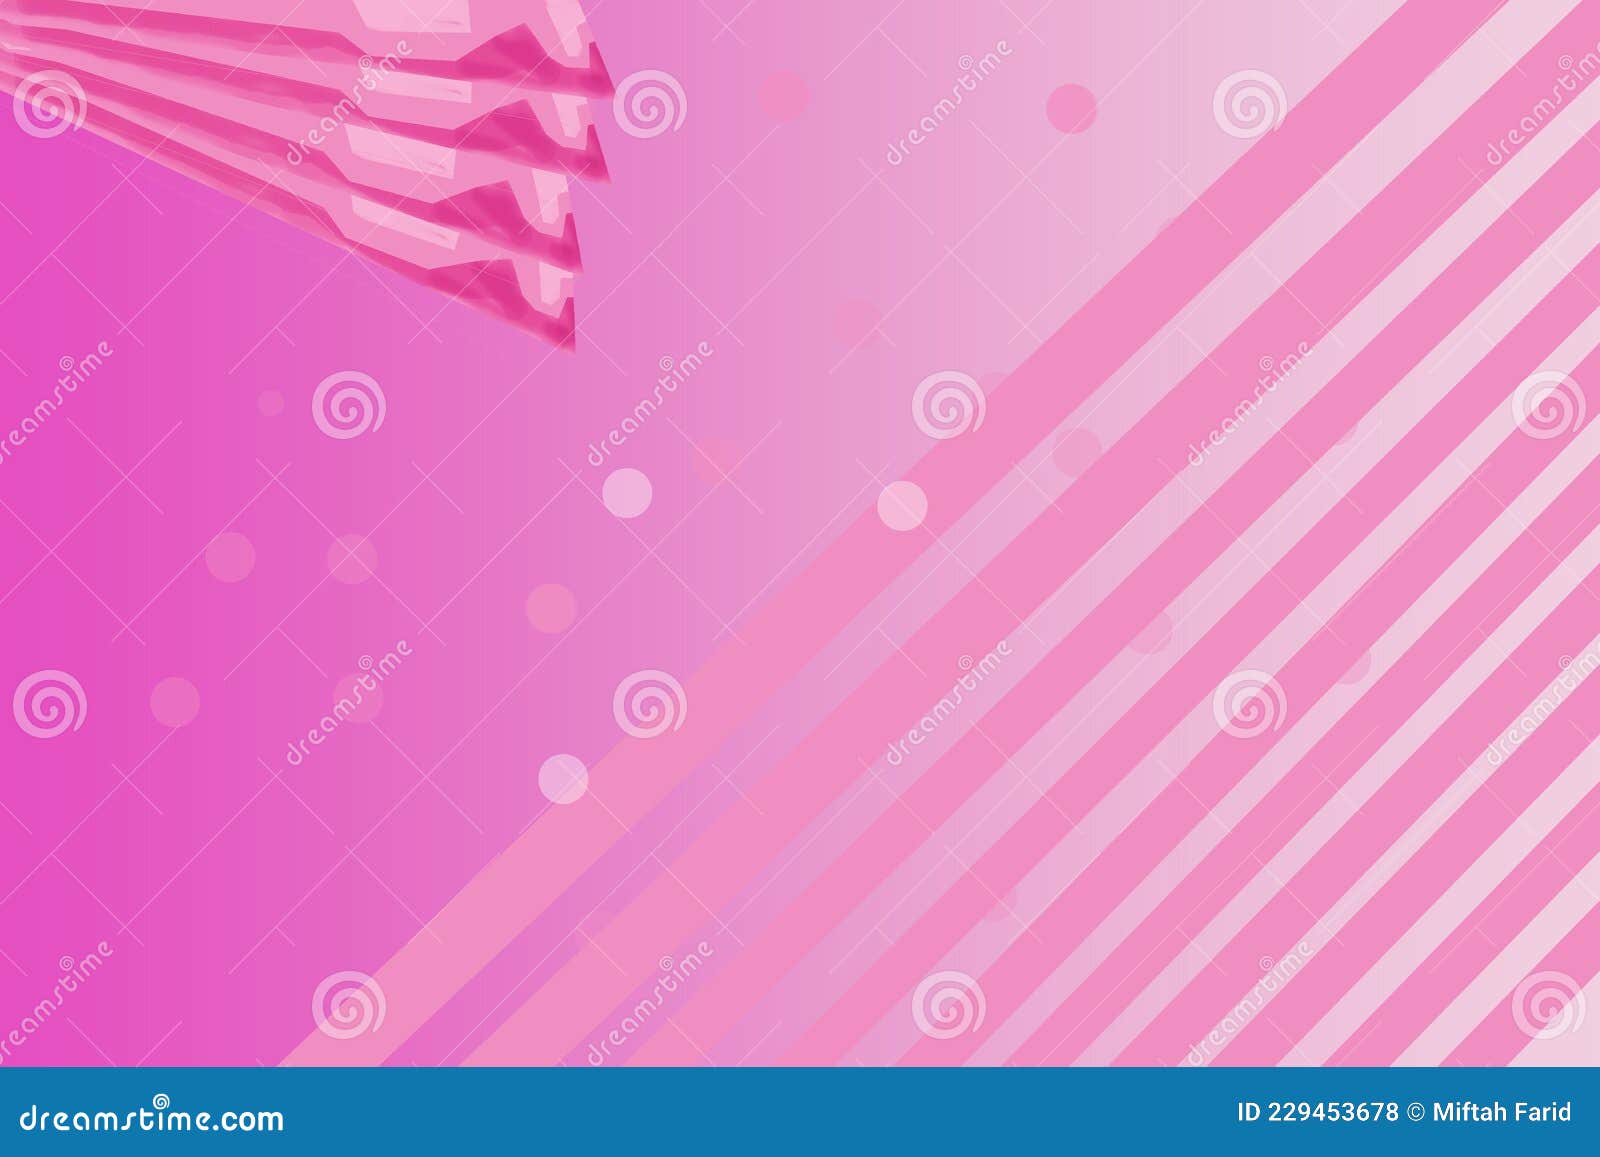 Pink Aesthetic Abstract Background Stock Illustration - Illustration of